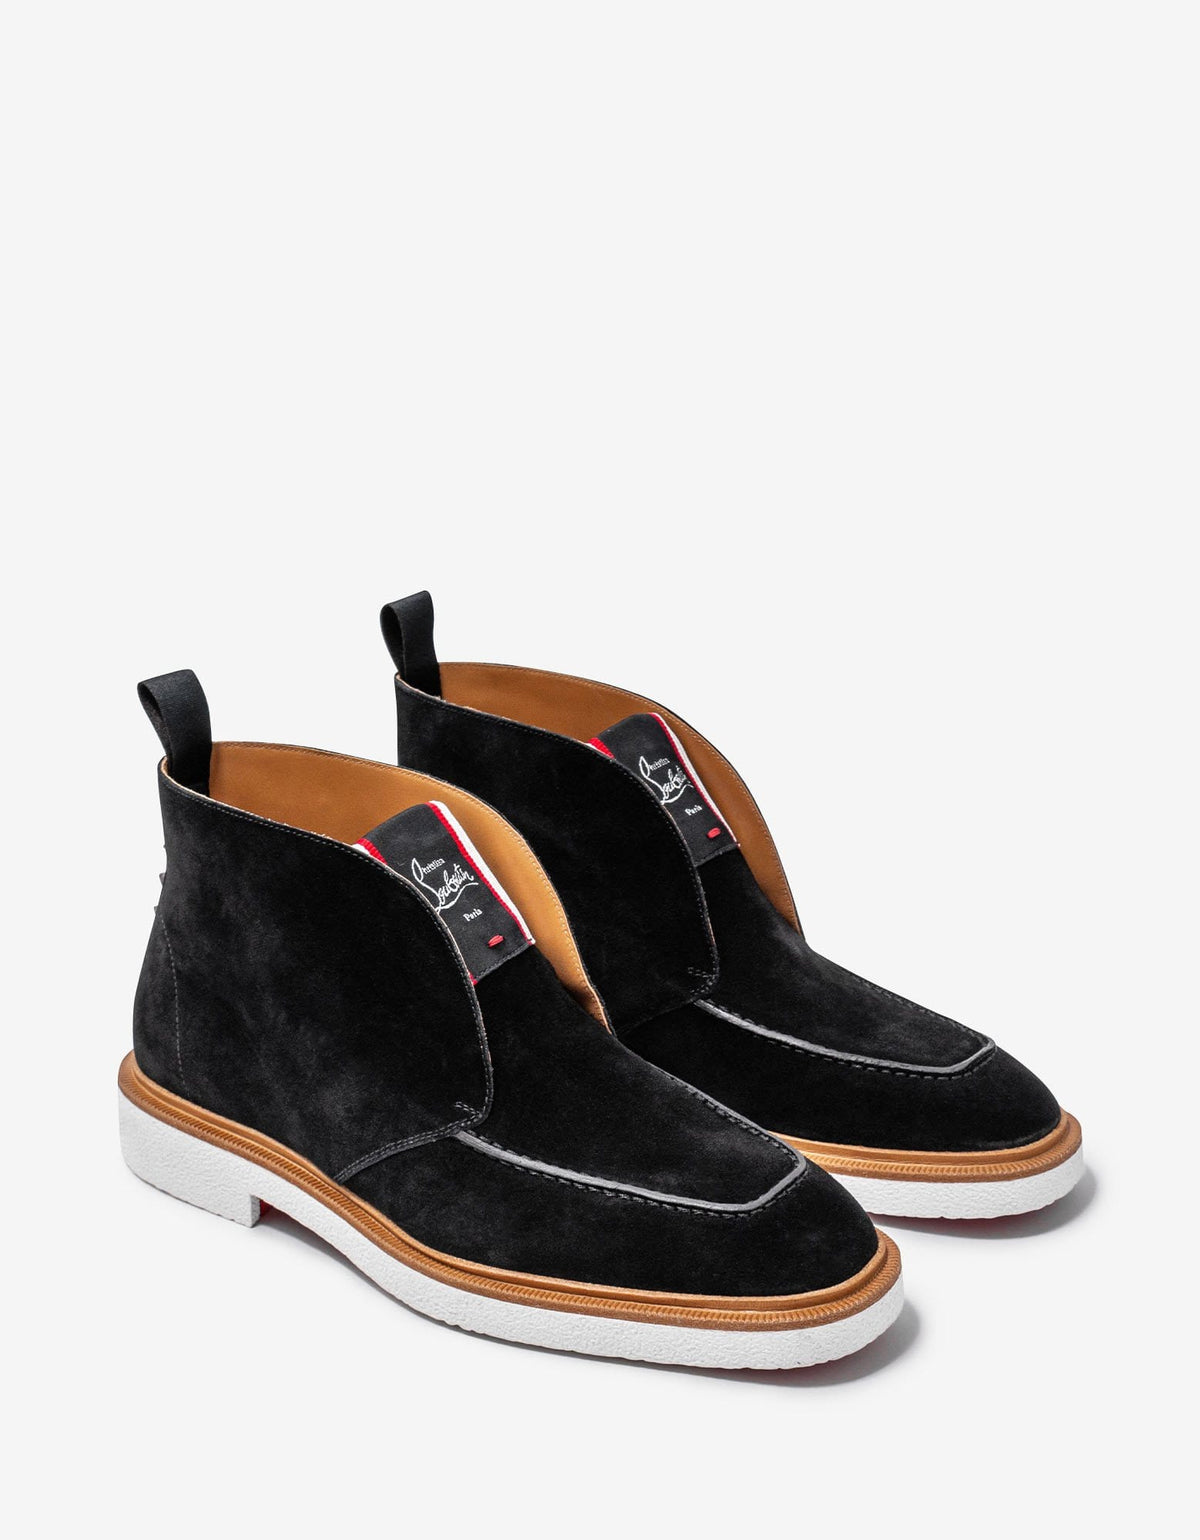 Christian Louboutin Citycrepe Black Suede Ankle Boots -